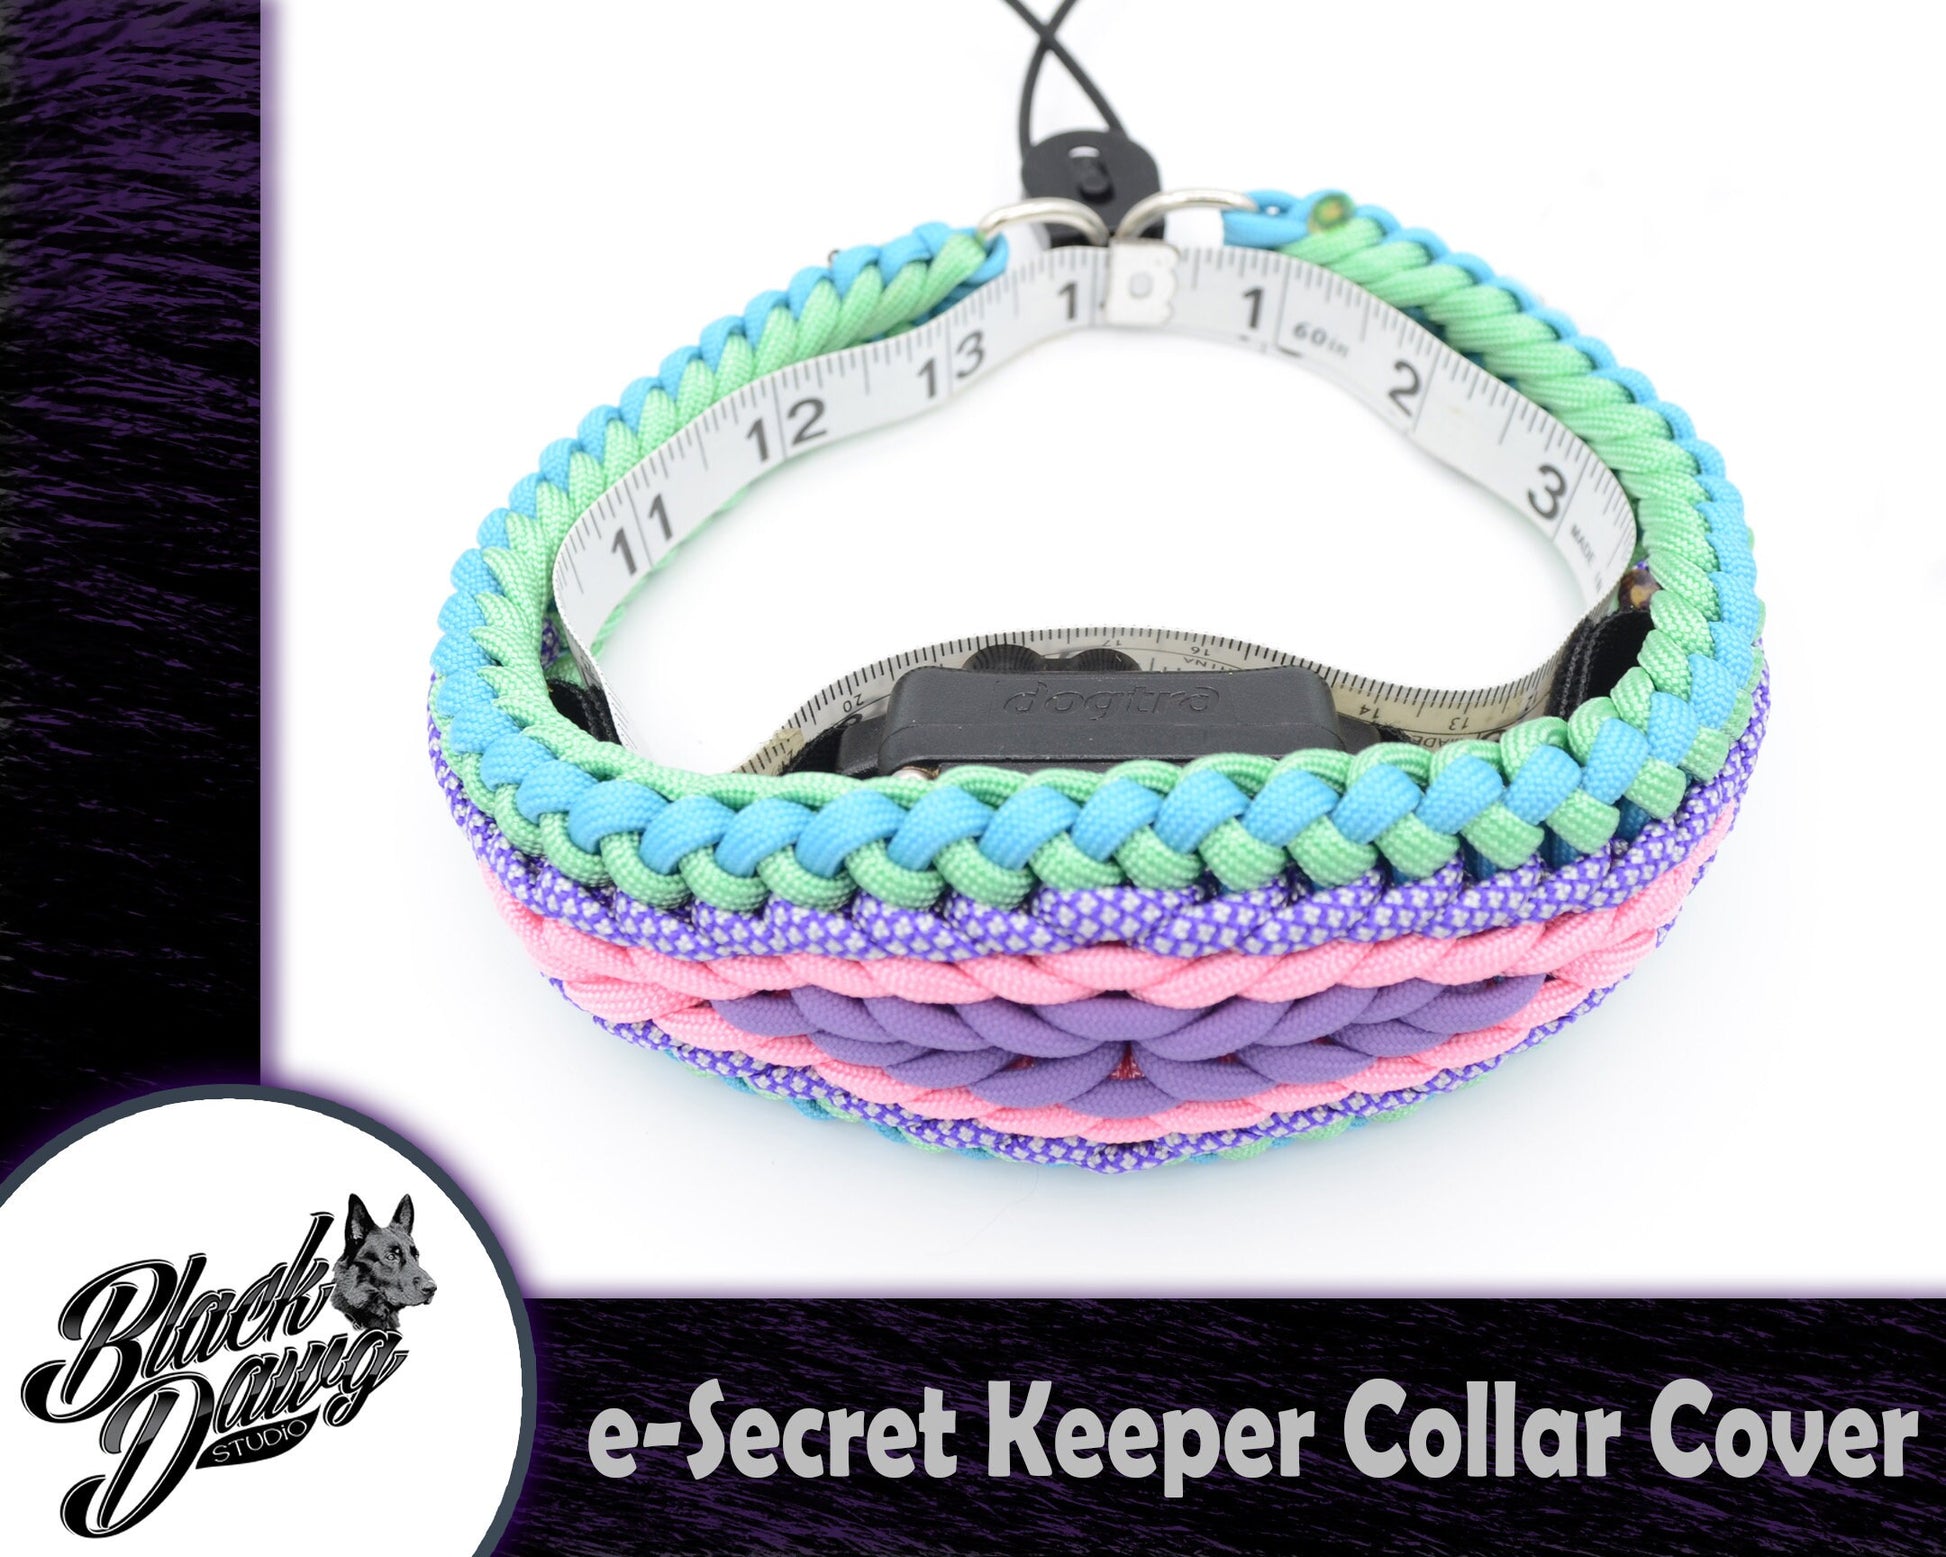 e-Secret Keeper Paracord Collar - Electric/Remote Training Collar Cover - Rainbow Colors - Select Your Own